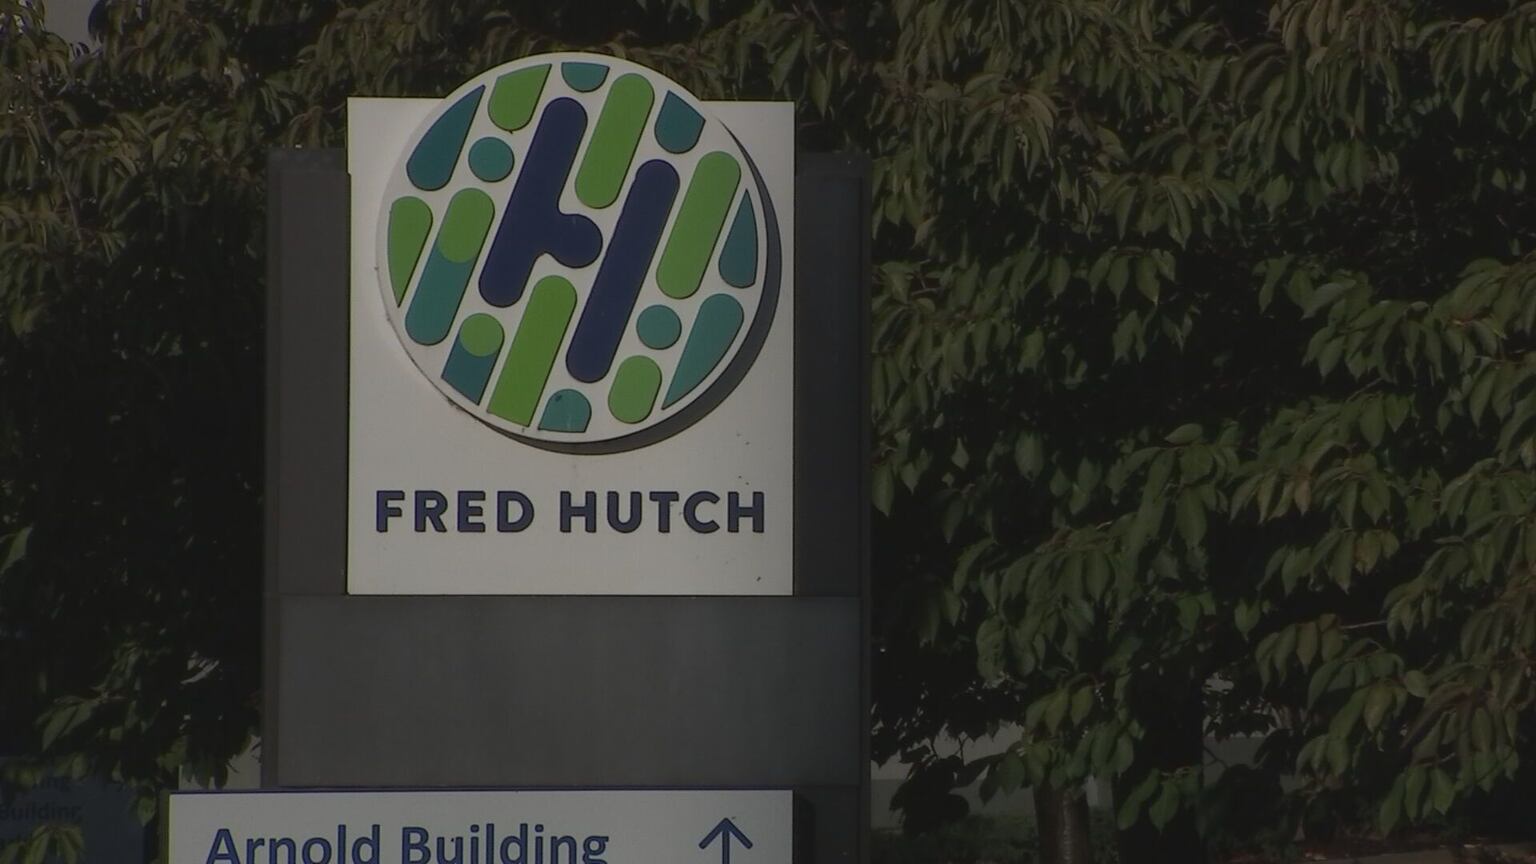 Fred Hutch hosts a rising star in Seattle sports